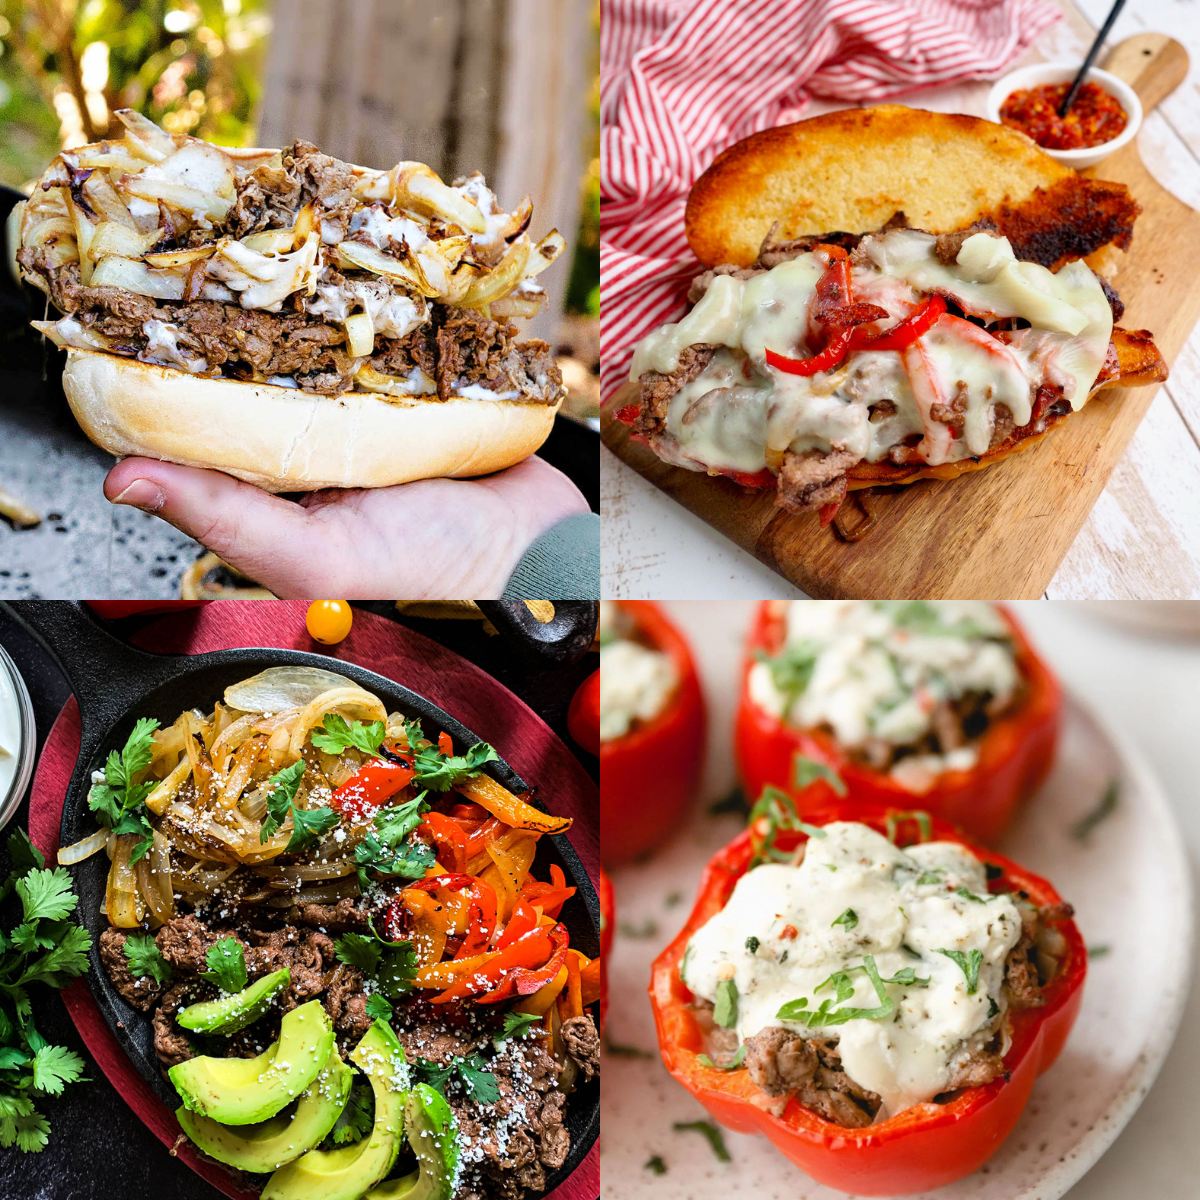 Best shaved steak recipes, round up picture with Philly cheesesteak, steak bomb, steak fajitas and stuffed peppers.